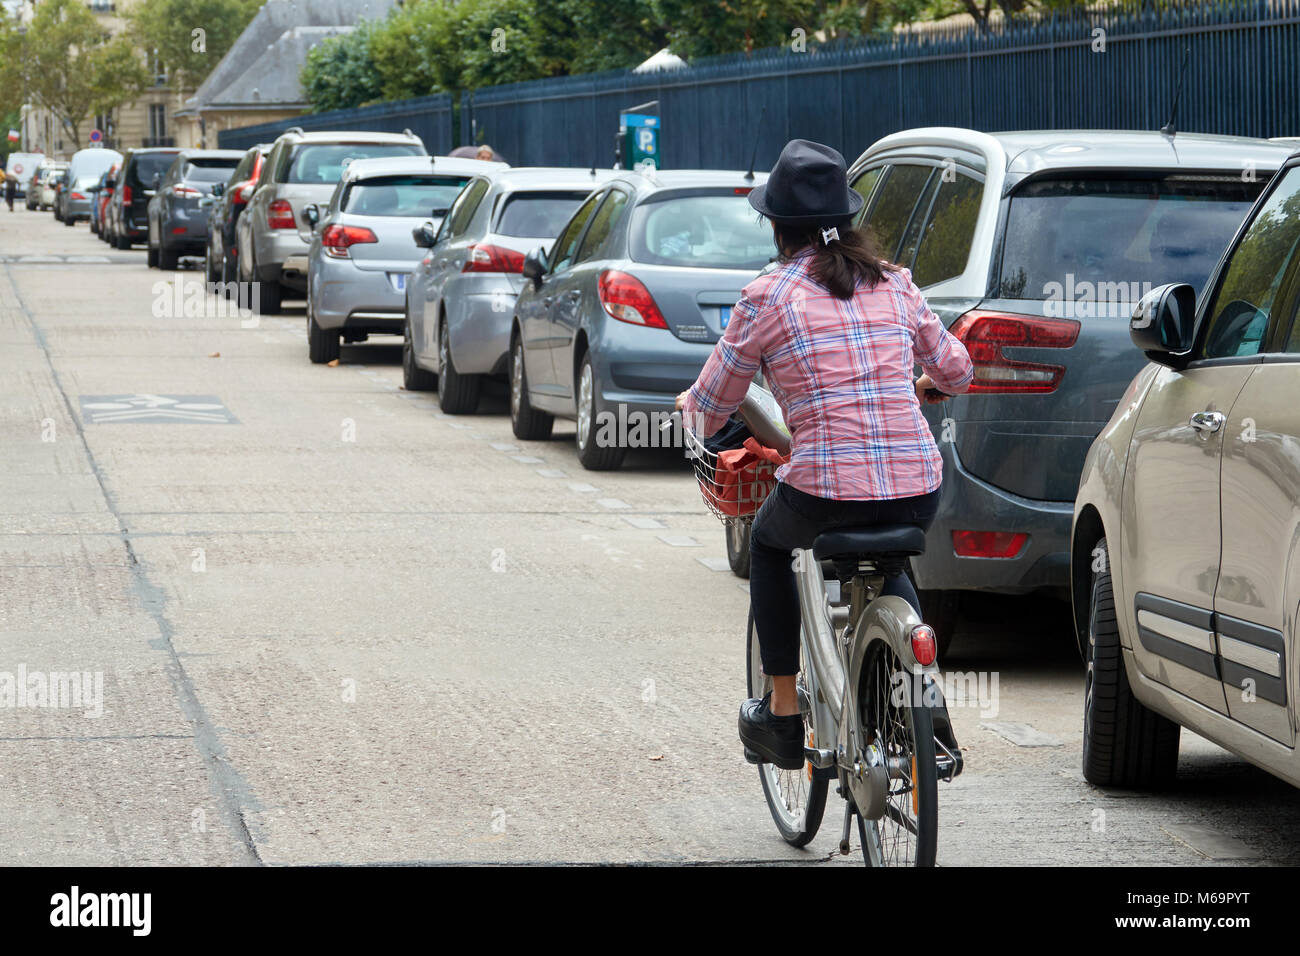 A woman in city clothes in a hat rides a bicycle along parked cars on a Paris street. Stock Photo